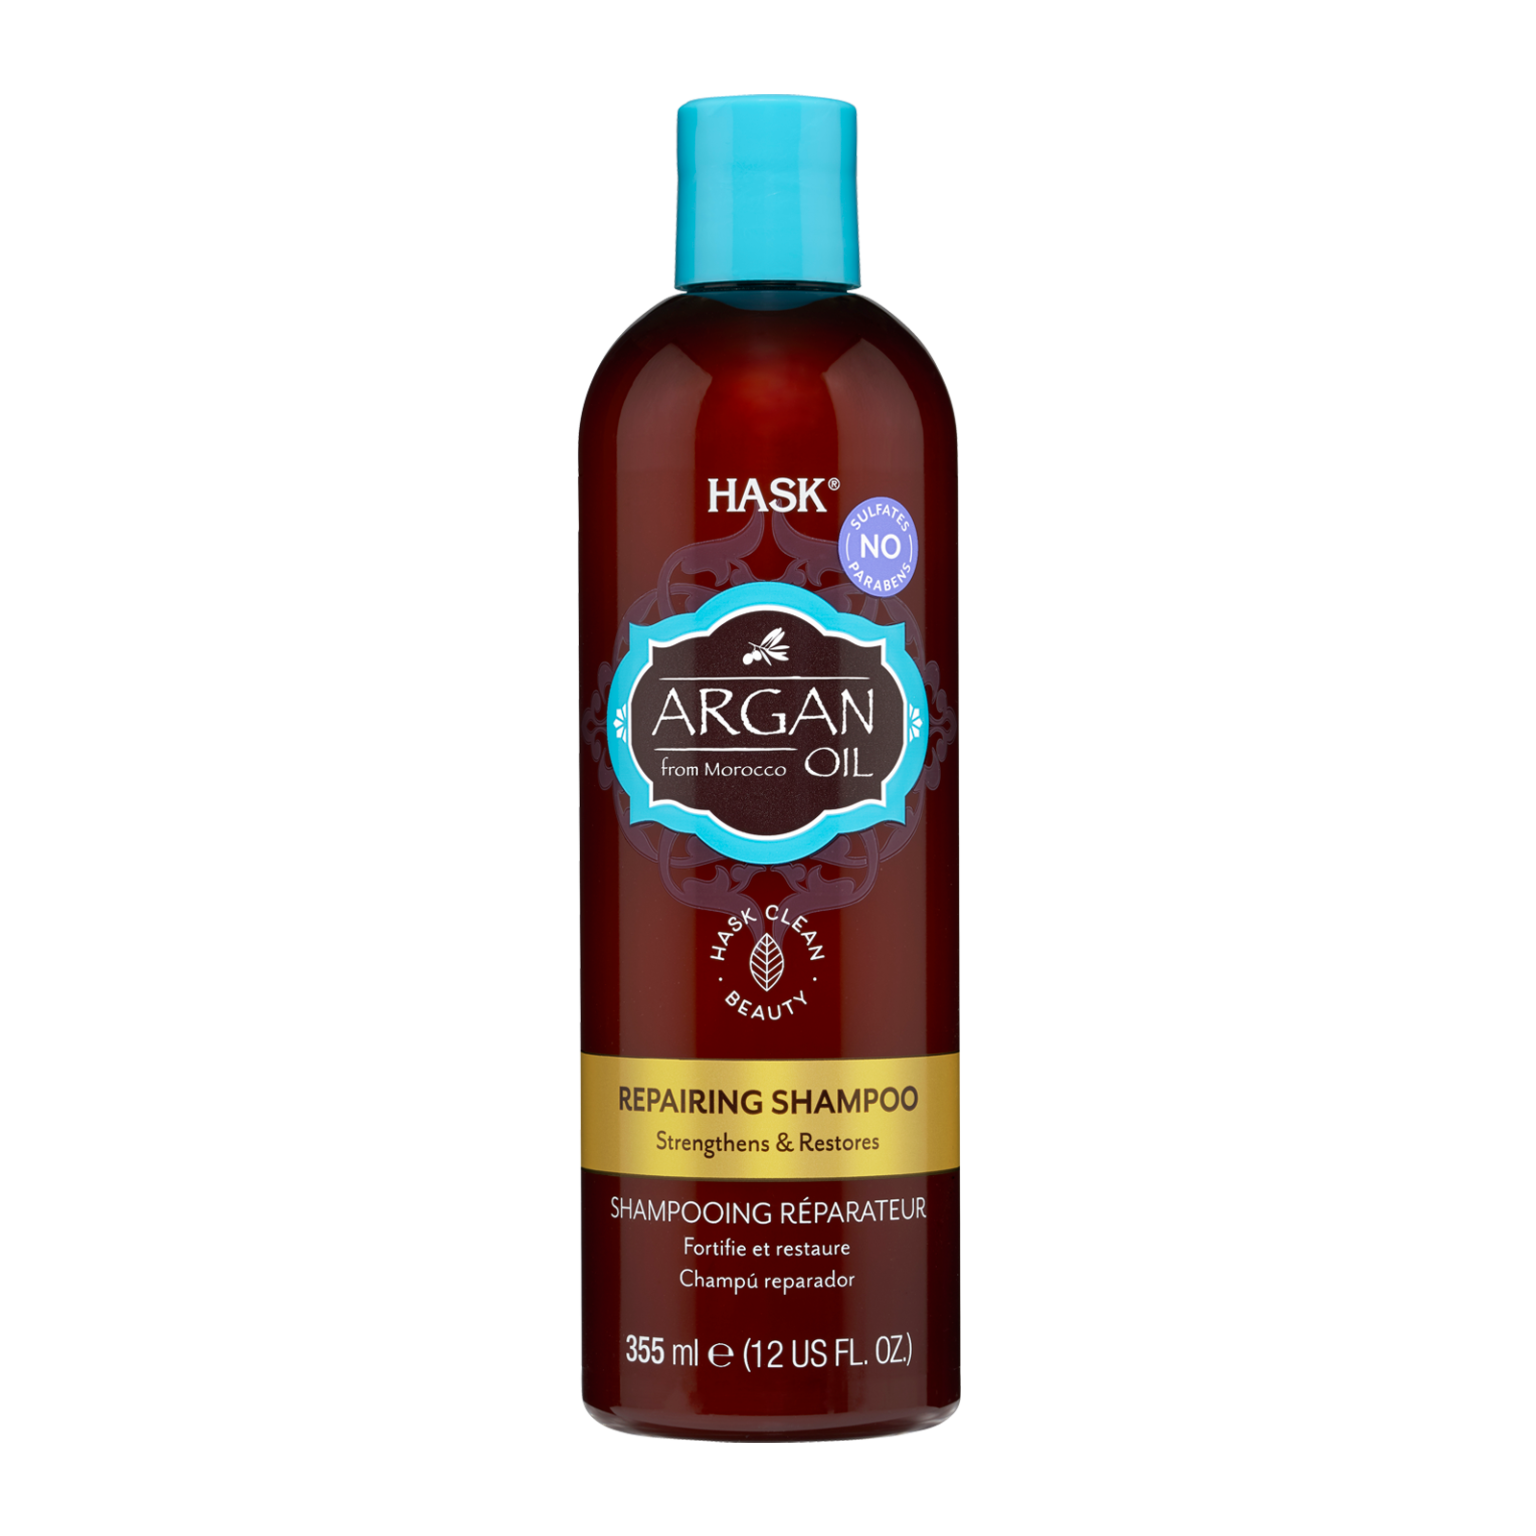 Hask Argan Oil From Morocco Repairing Shampoo & Conditioner